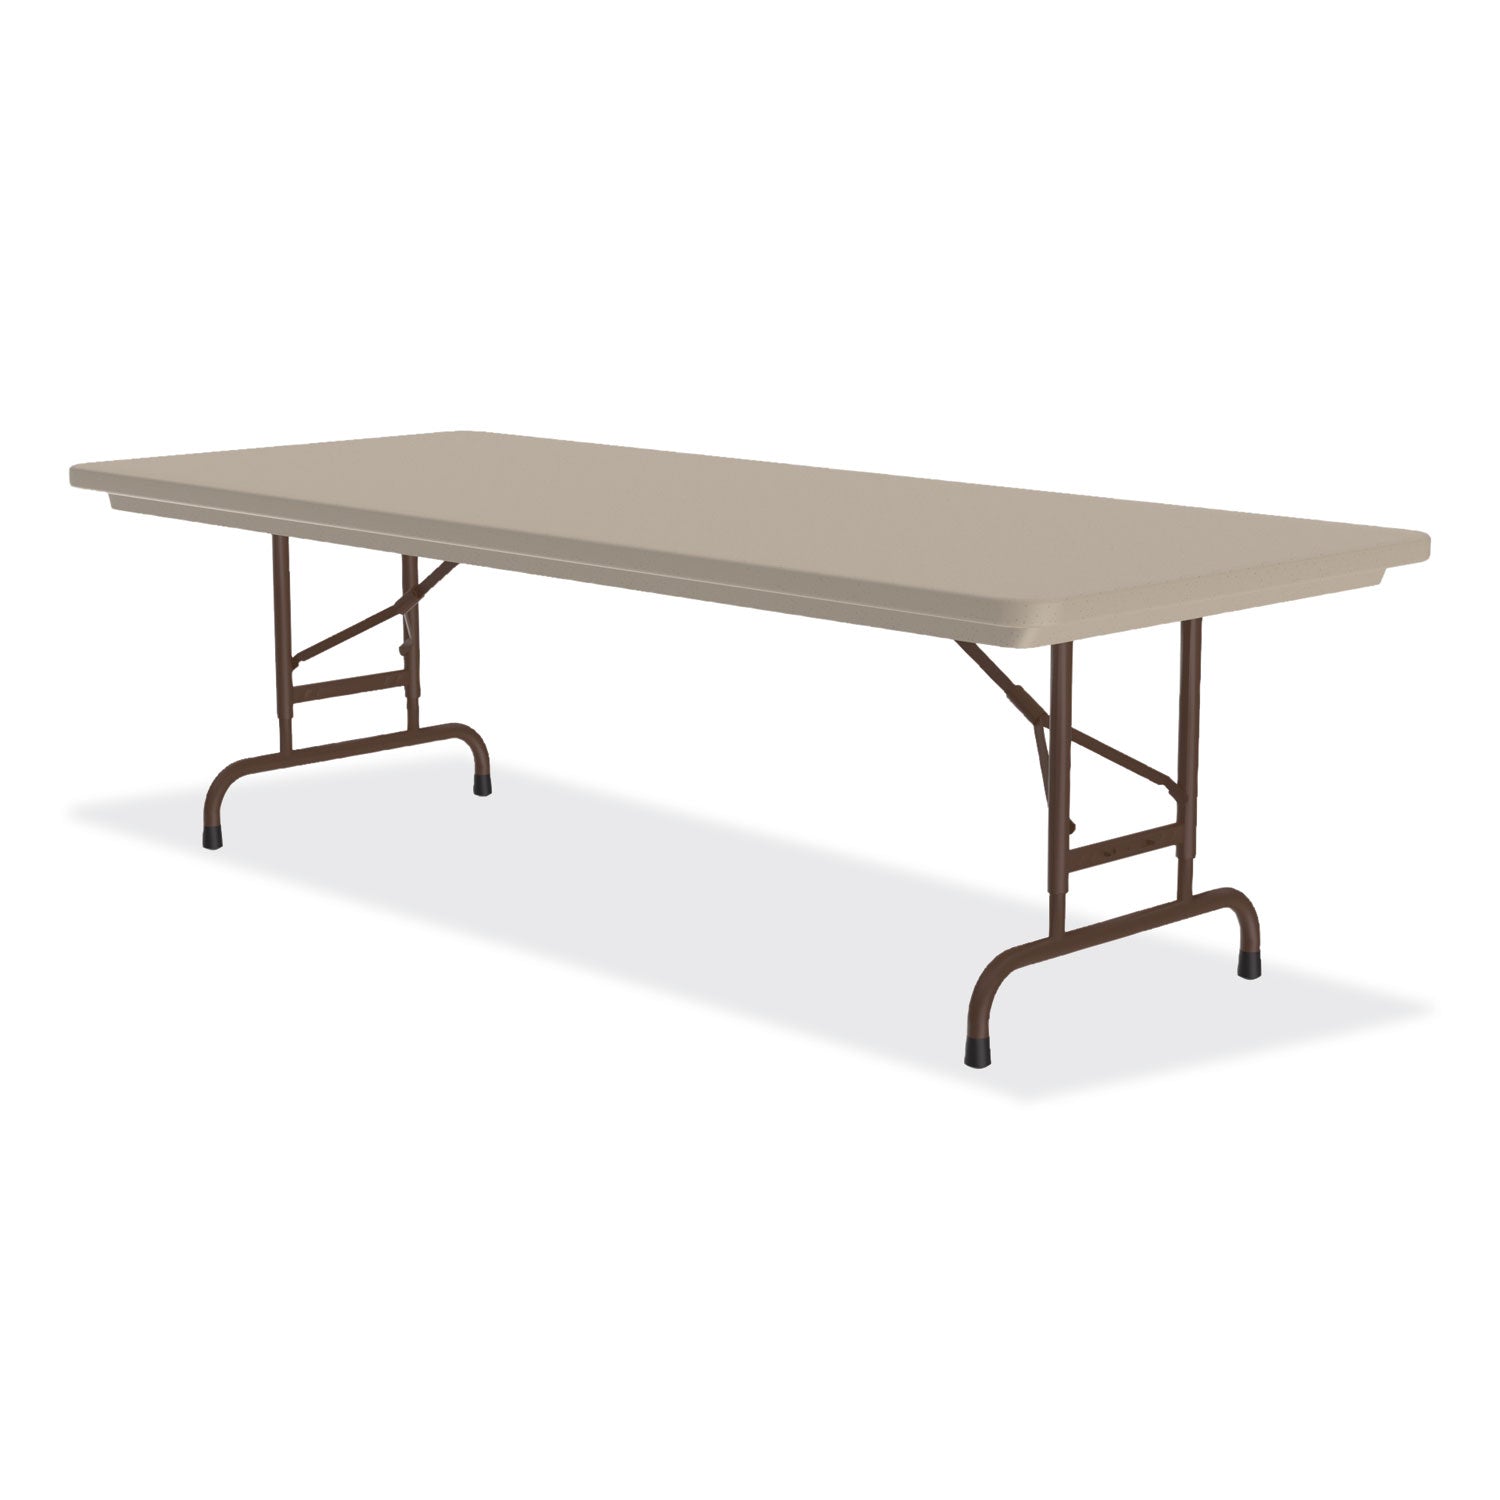 adjustable-folding-tables-rectangular-96-x-30-x-22-to-32-mocha-top-brown-legs-4-pallet-ships-in-4-6-business-days_crlra3096244p - 7